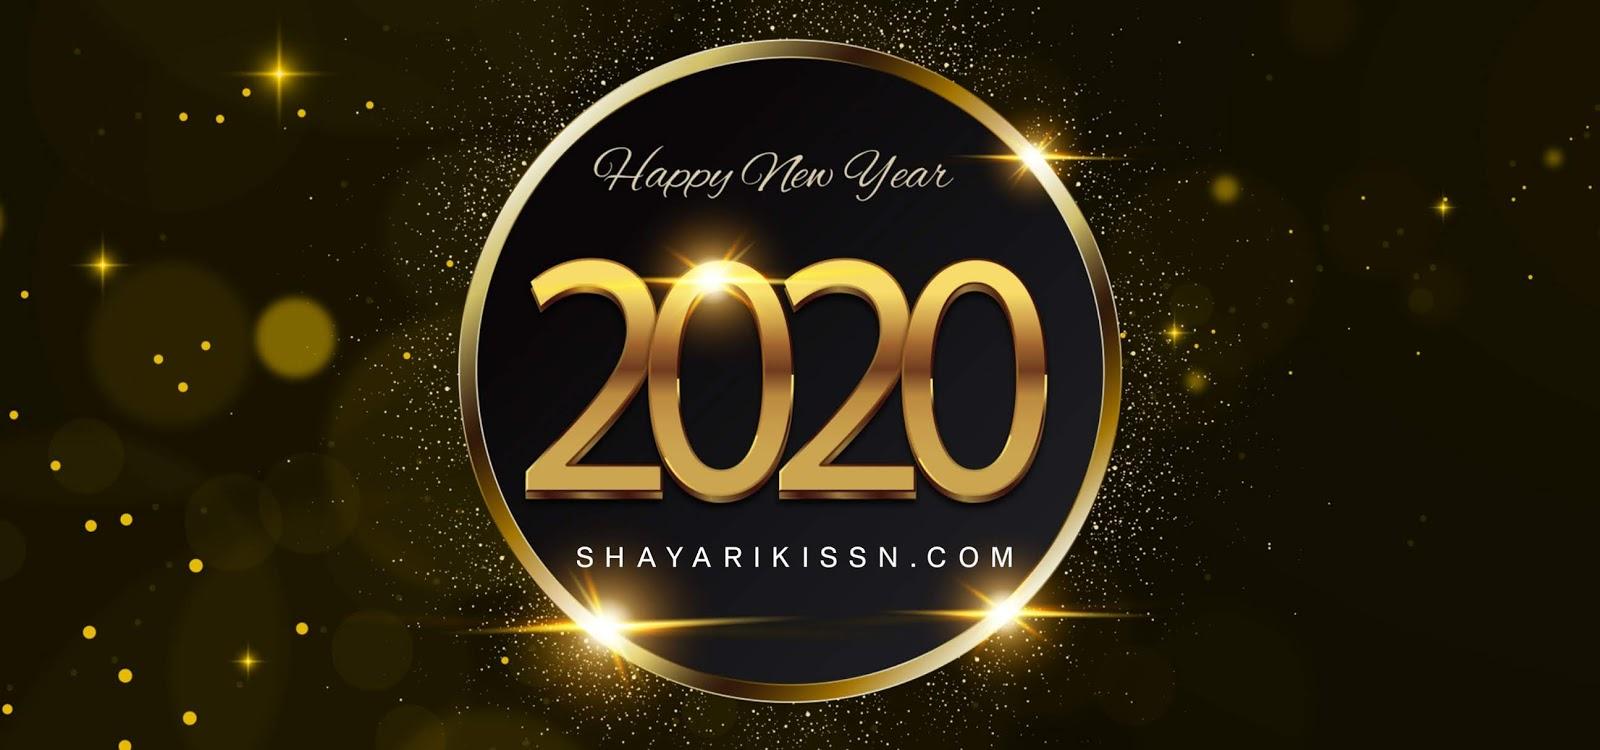 Happy New Year 2020 Wallpaper, Image, Wishes and Quotes